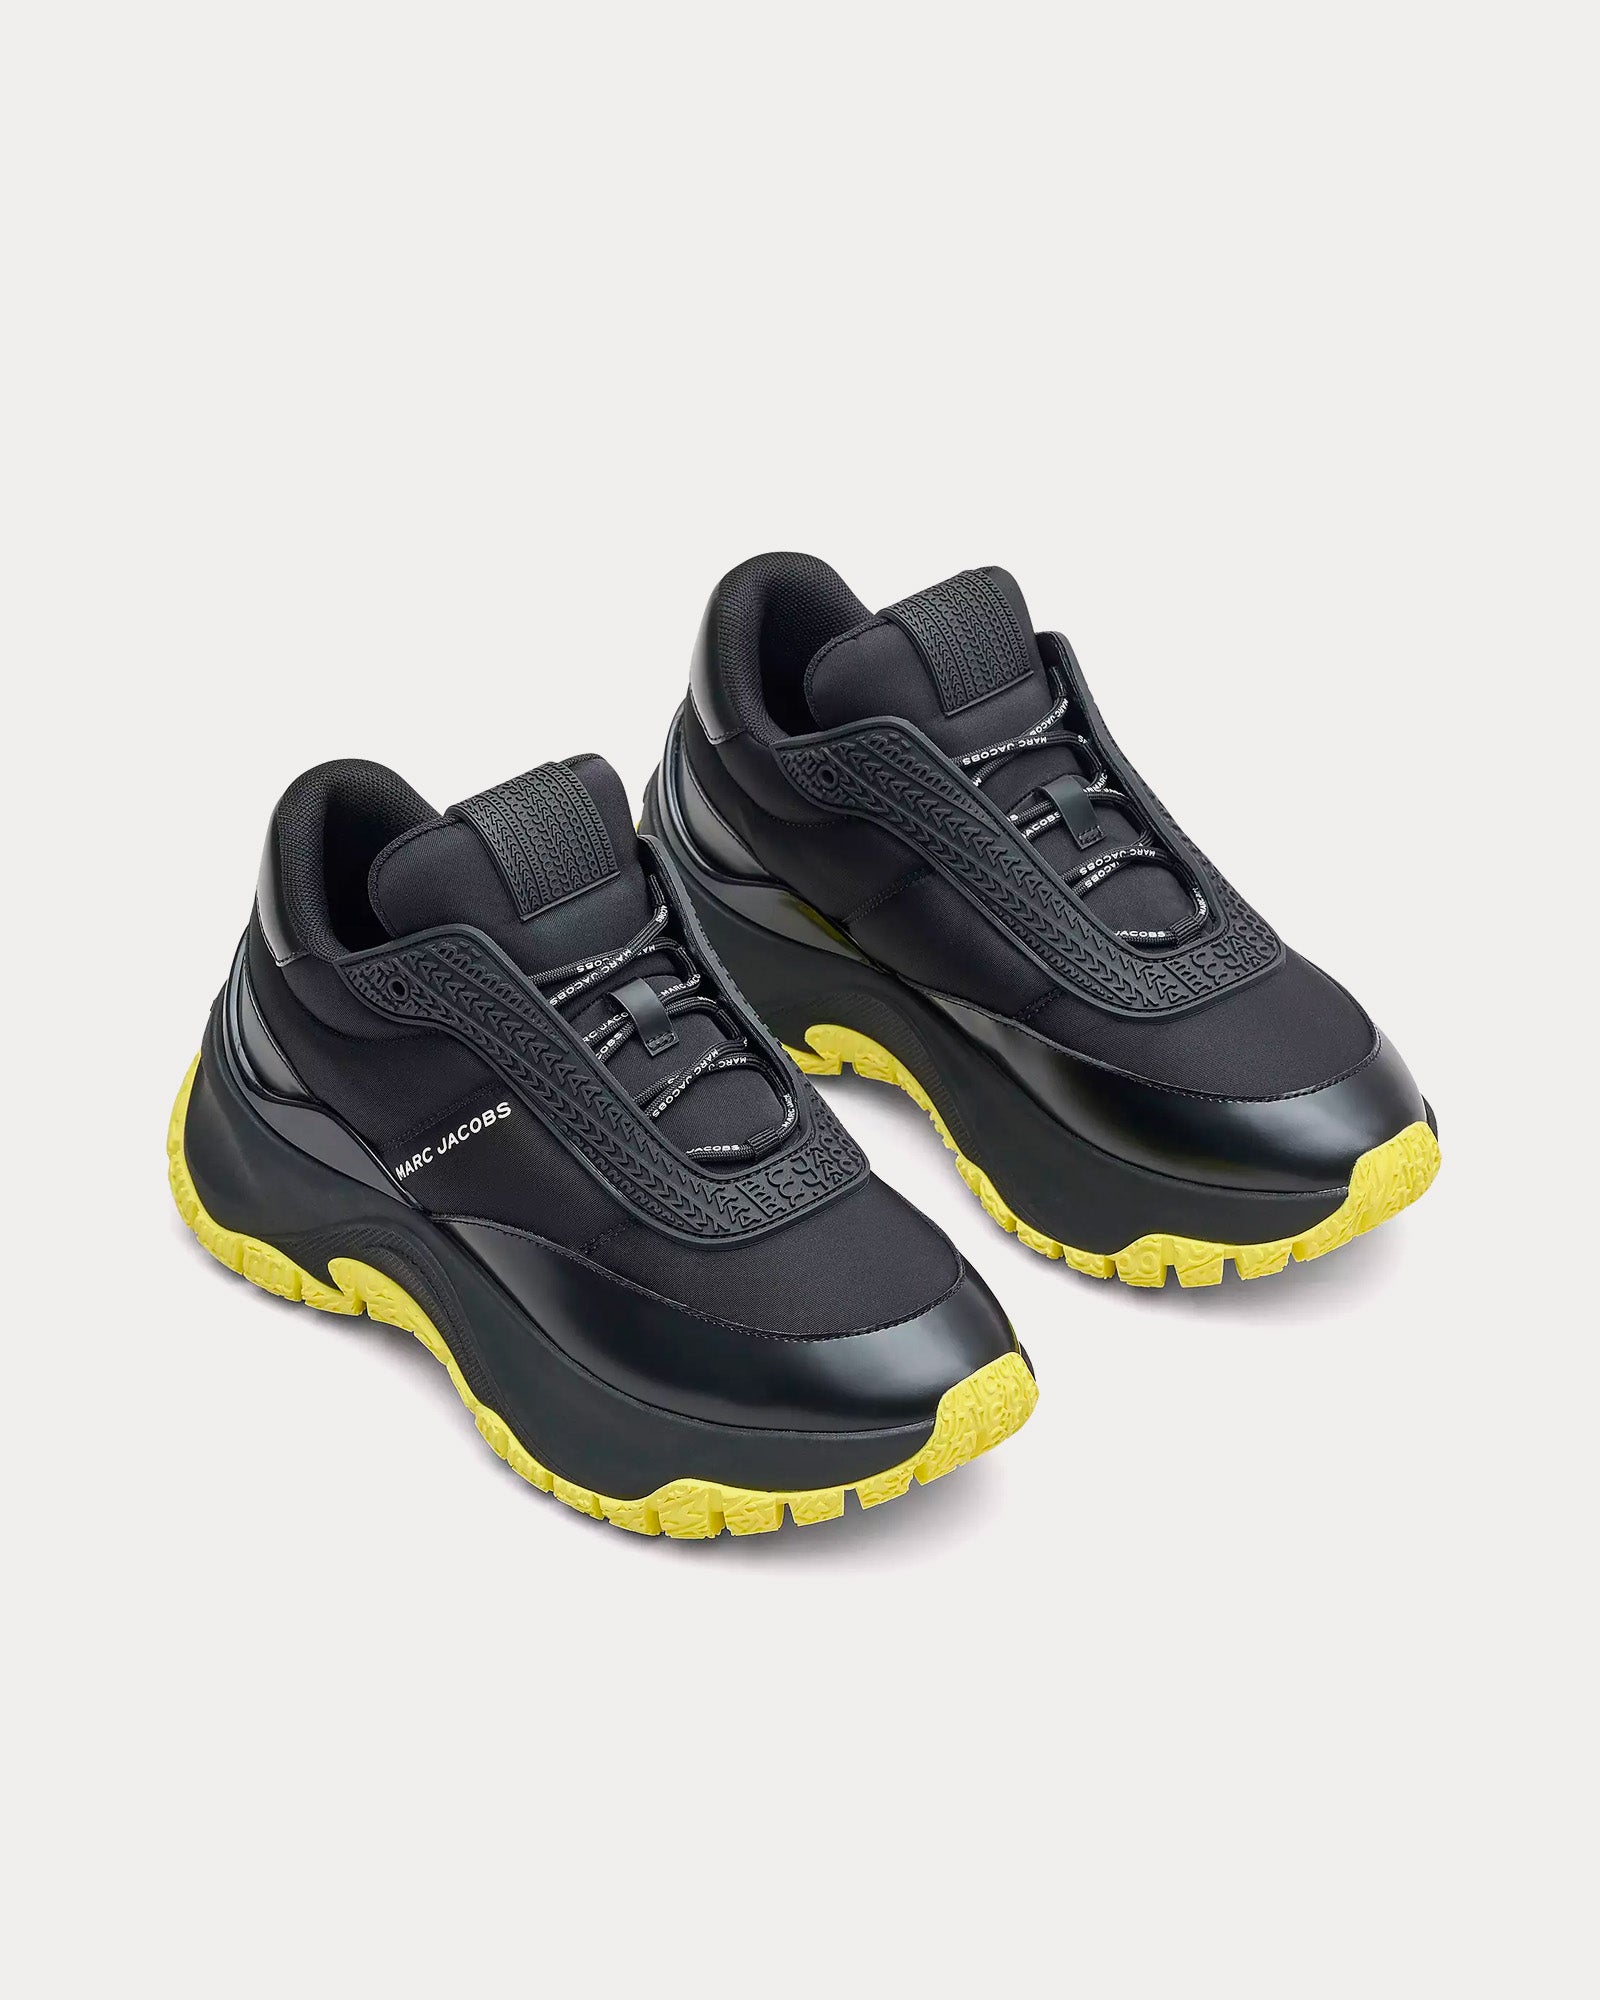 Marc Jacobs - The Lazy Runner Black / Yellow Low Top Sneakers